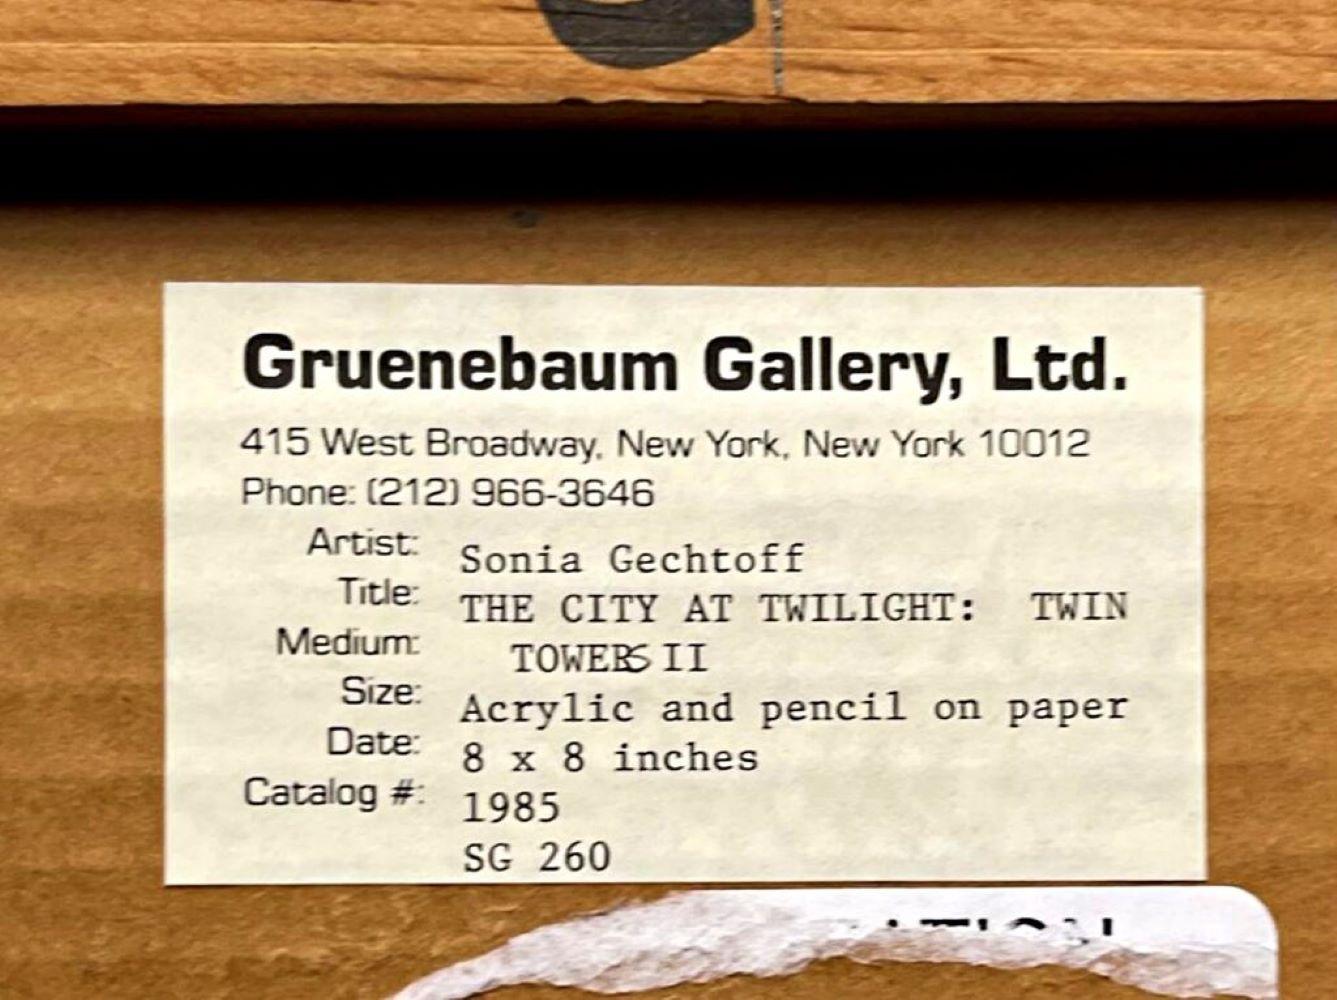 The City at Twilight: Twin Towers II, signed painting, Gruenebaum Gallery label - Abstract Expressionist Painting by Sonia Gechtoff